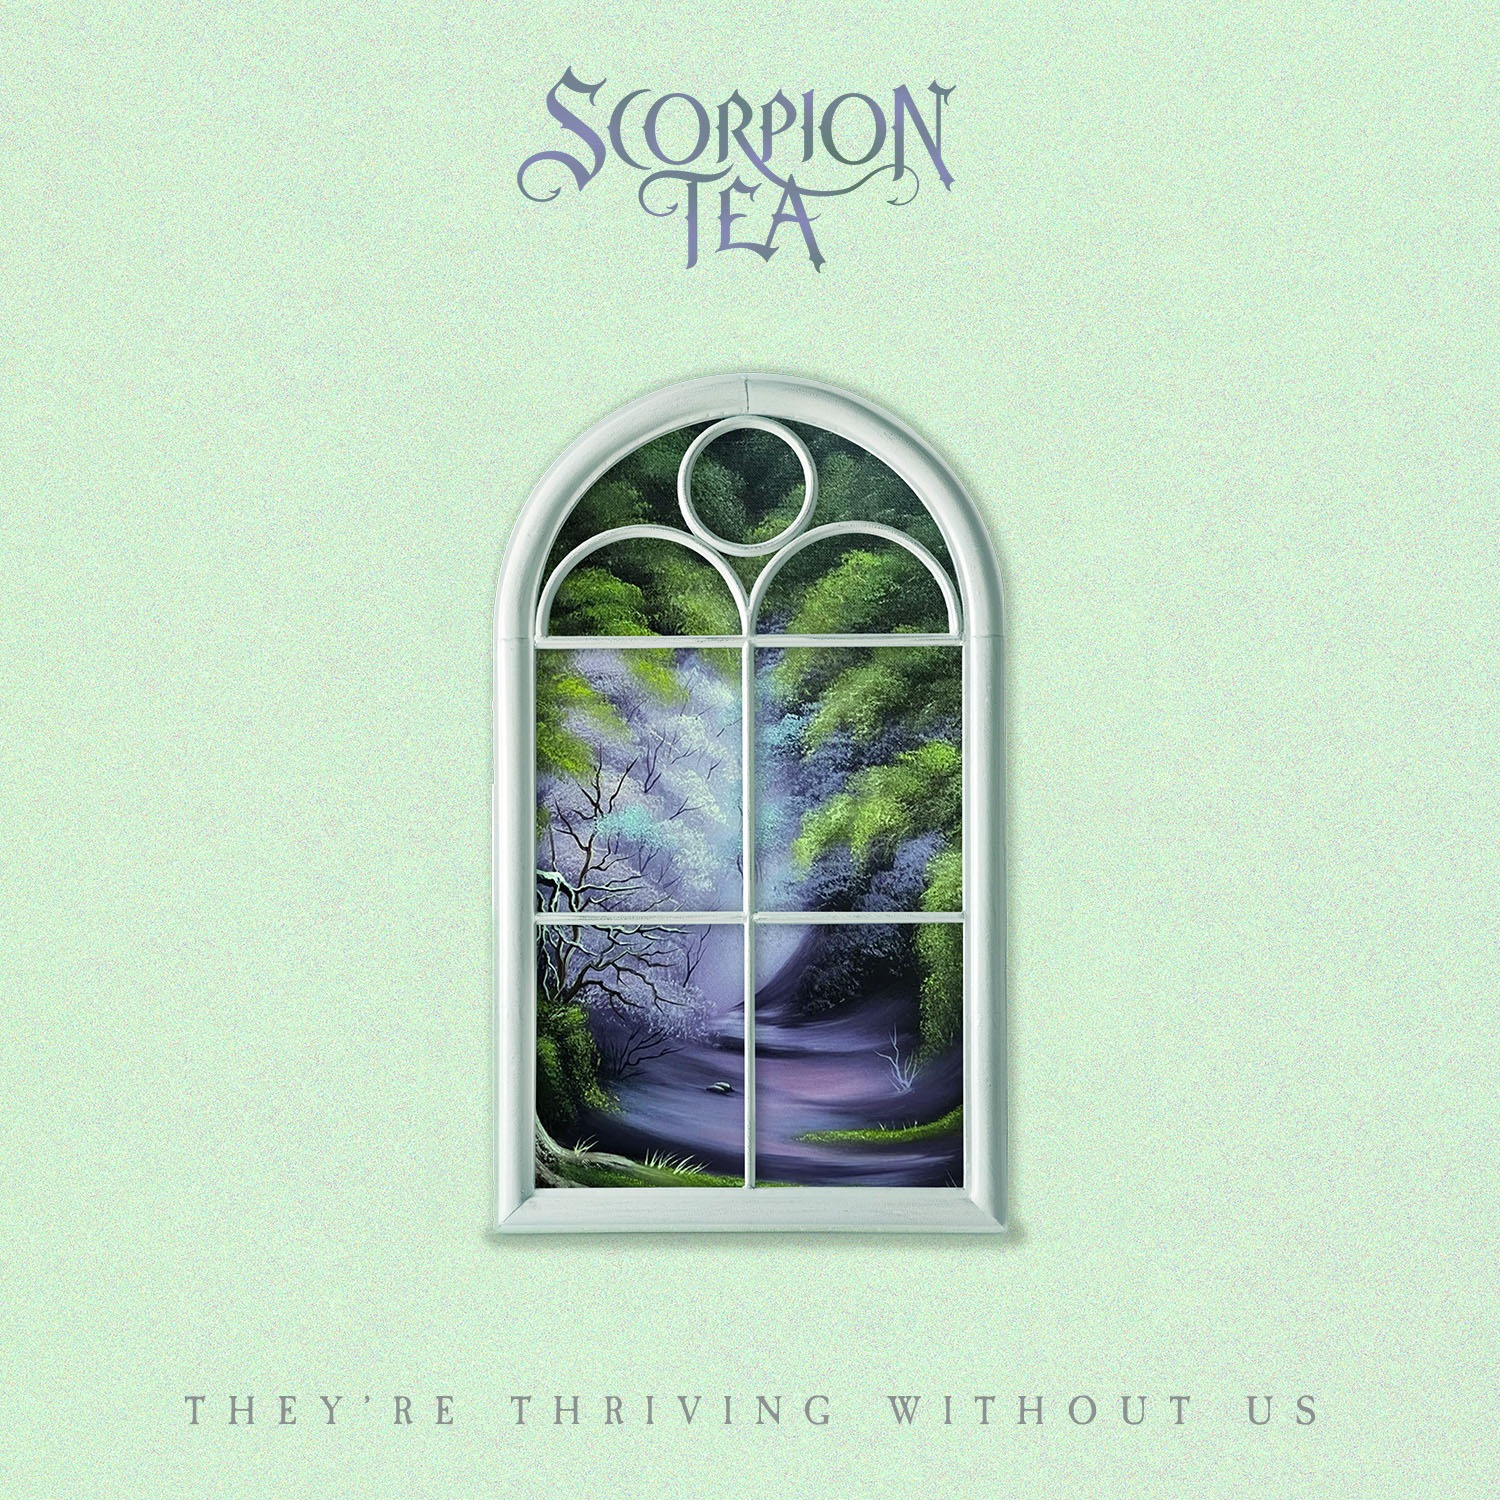 Scorpion Tea Unleash “They‘re Thriving Without Us” single artwork